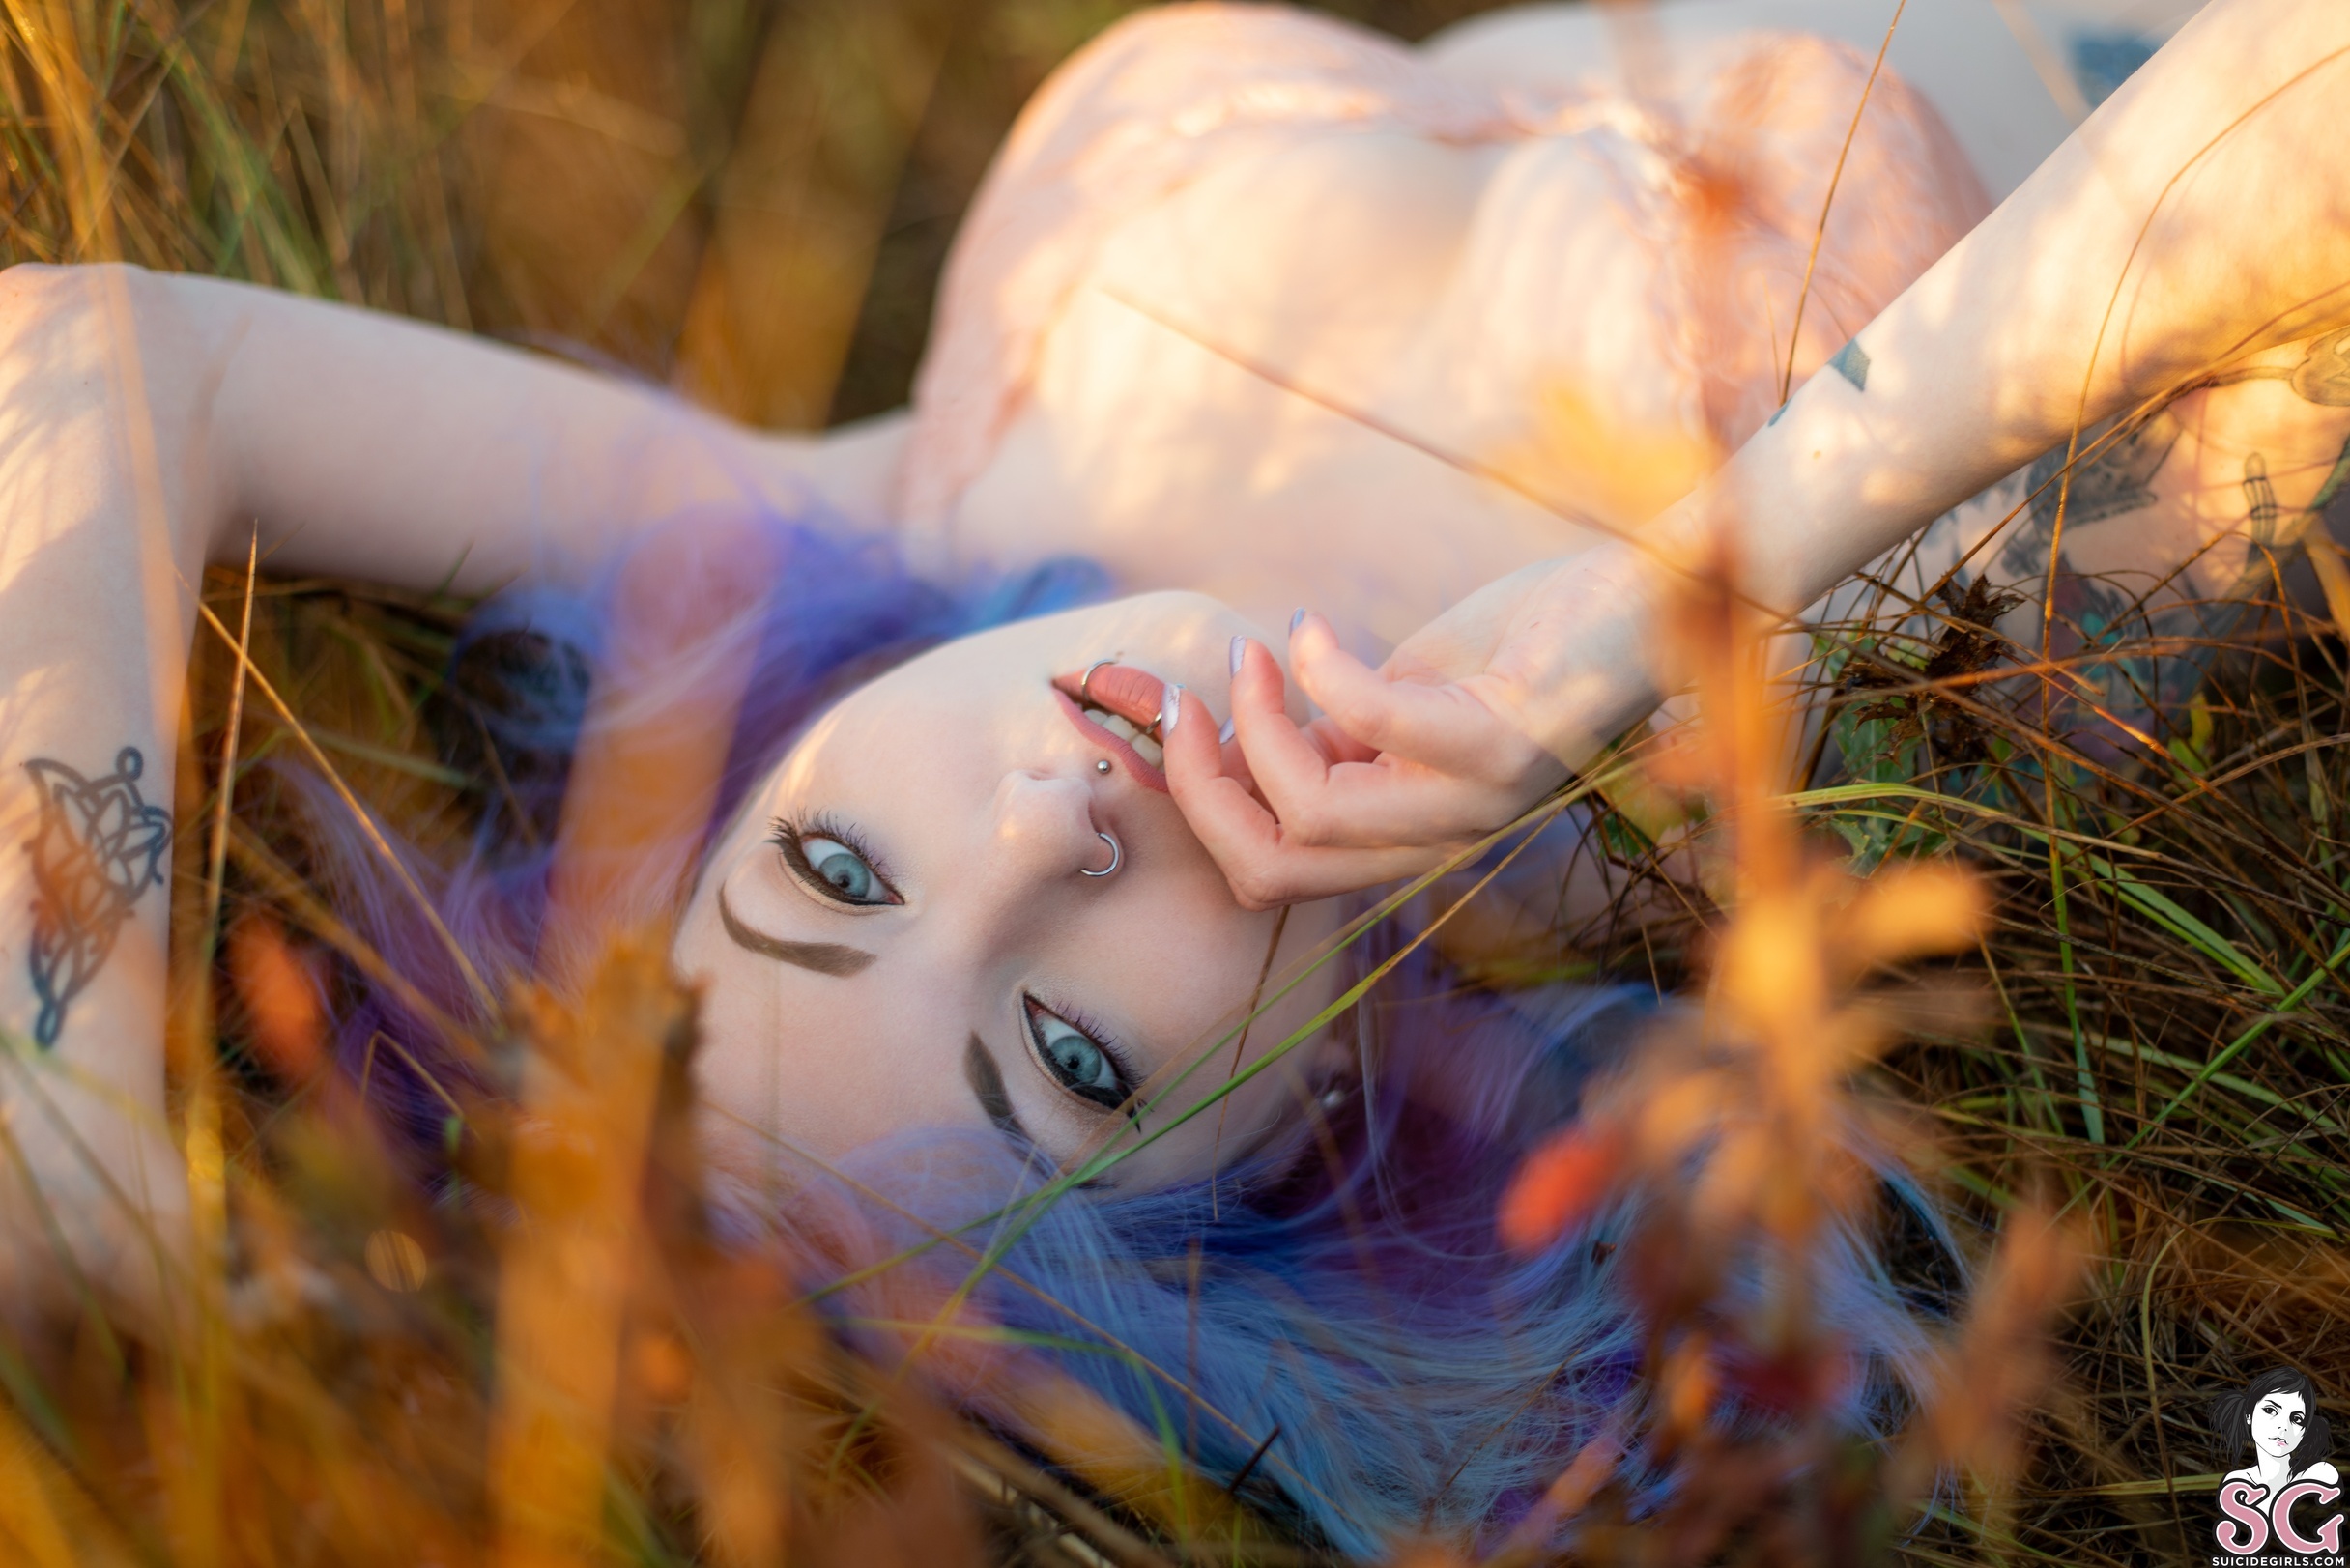 People 2432x1623 Nayru Suicide on the floor lying on back women women outdoors painted nails blue eyes model looking at viewer piercing tattoo dyed hair lingerie Suicide Girls face pierced lip pierced nose nose ring closeup watermarked